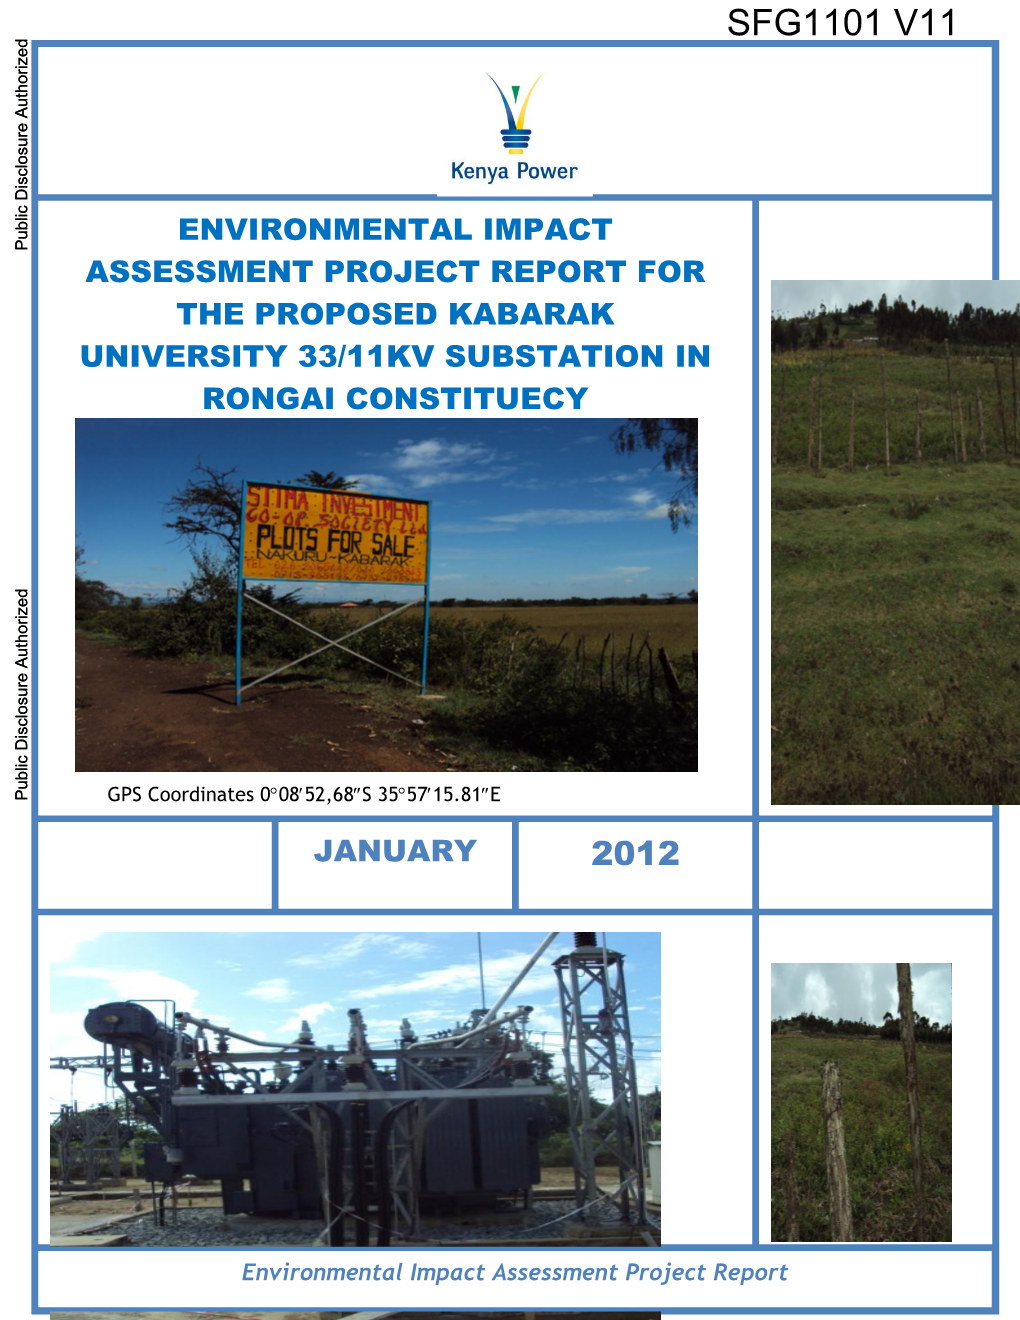 Environmental Impact Assessment Project Report for the Proposed